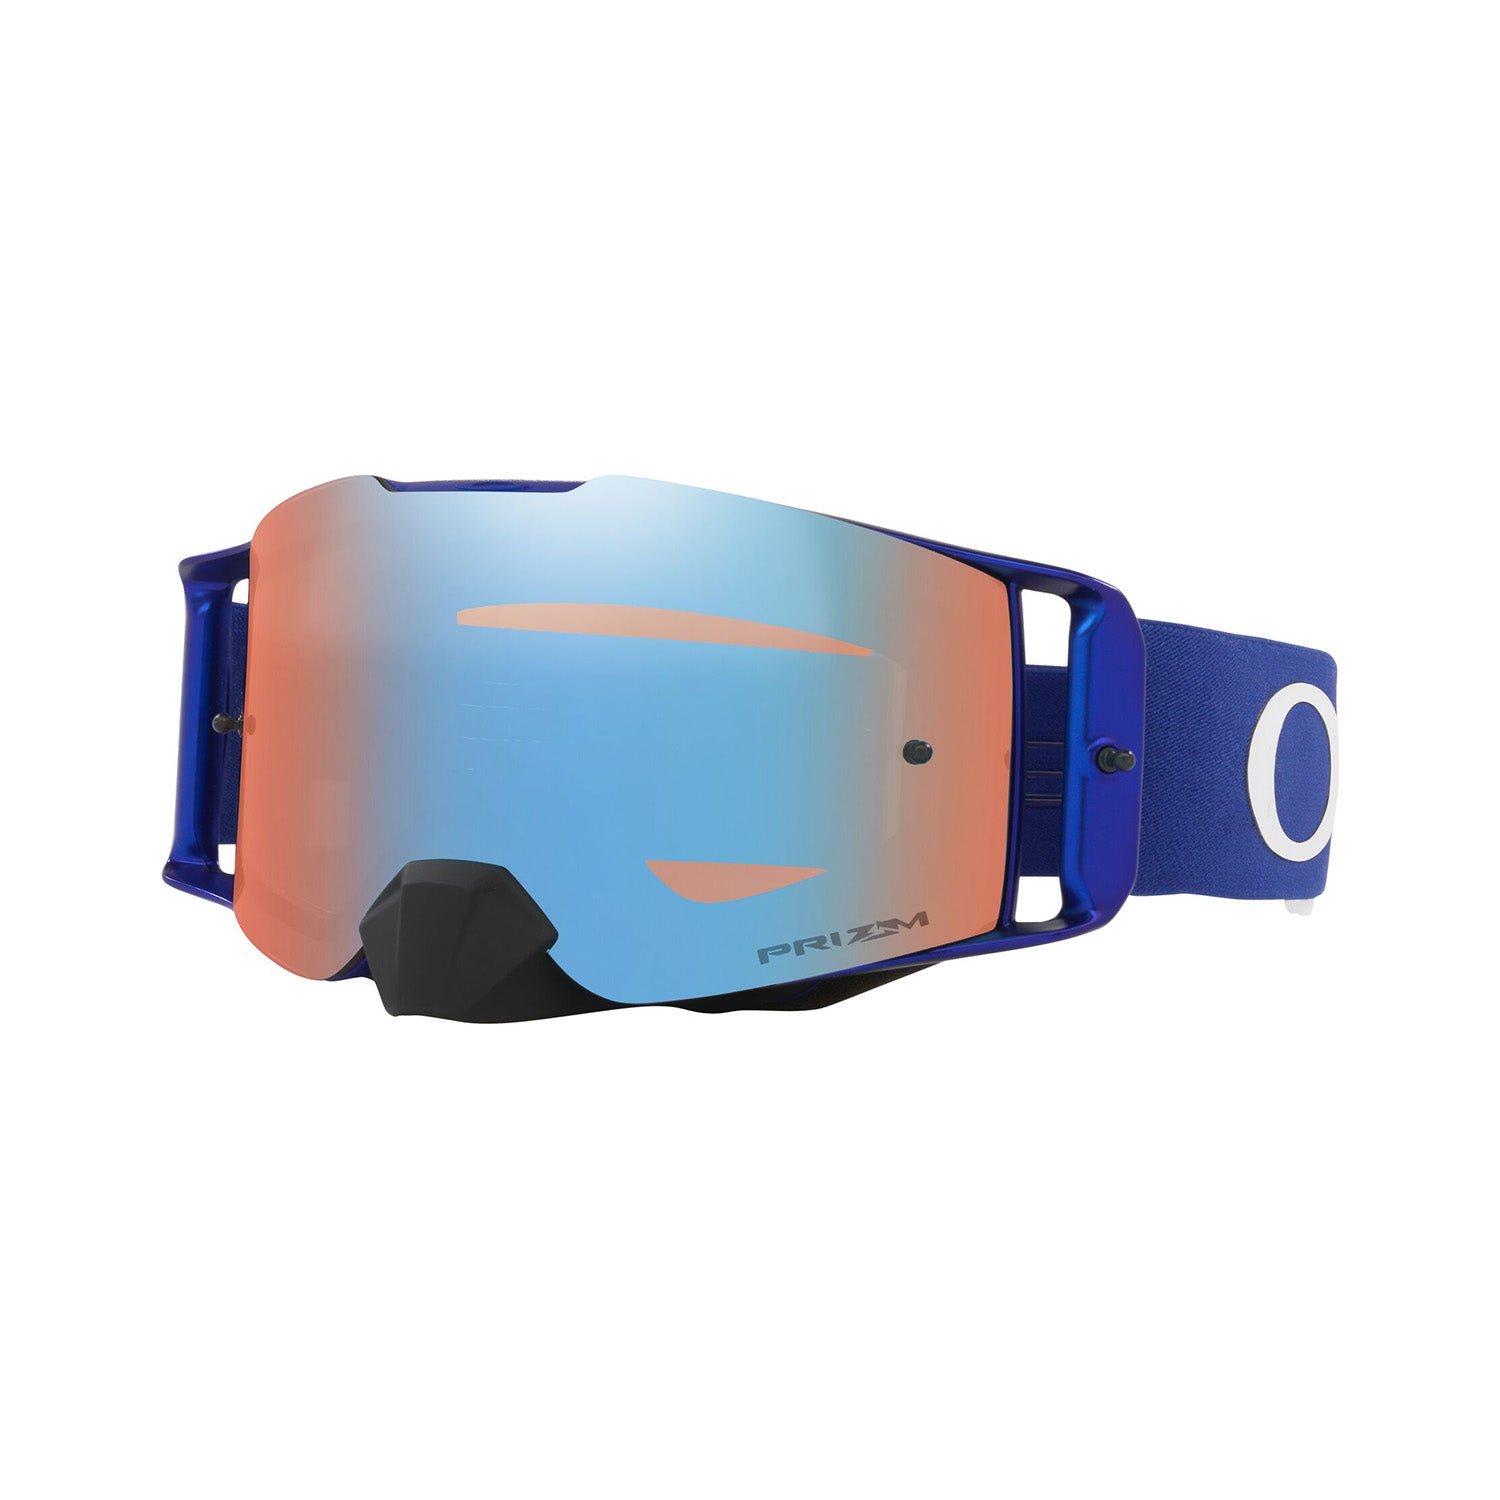 Oakley Front Line MX Goggle in Moto Blue with Prizm Sapphire Iridium Lens